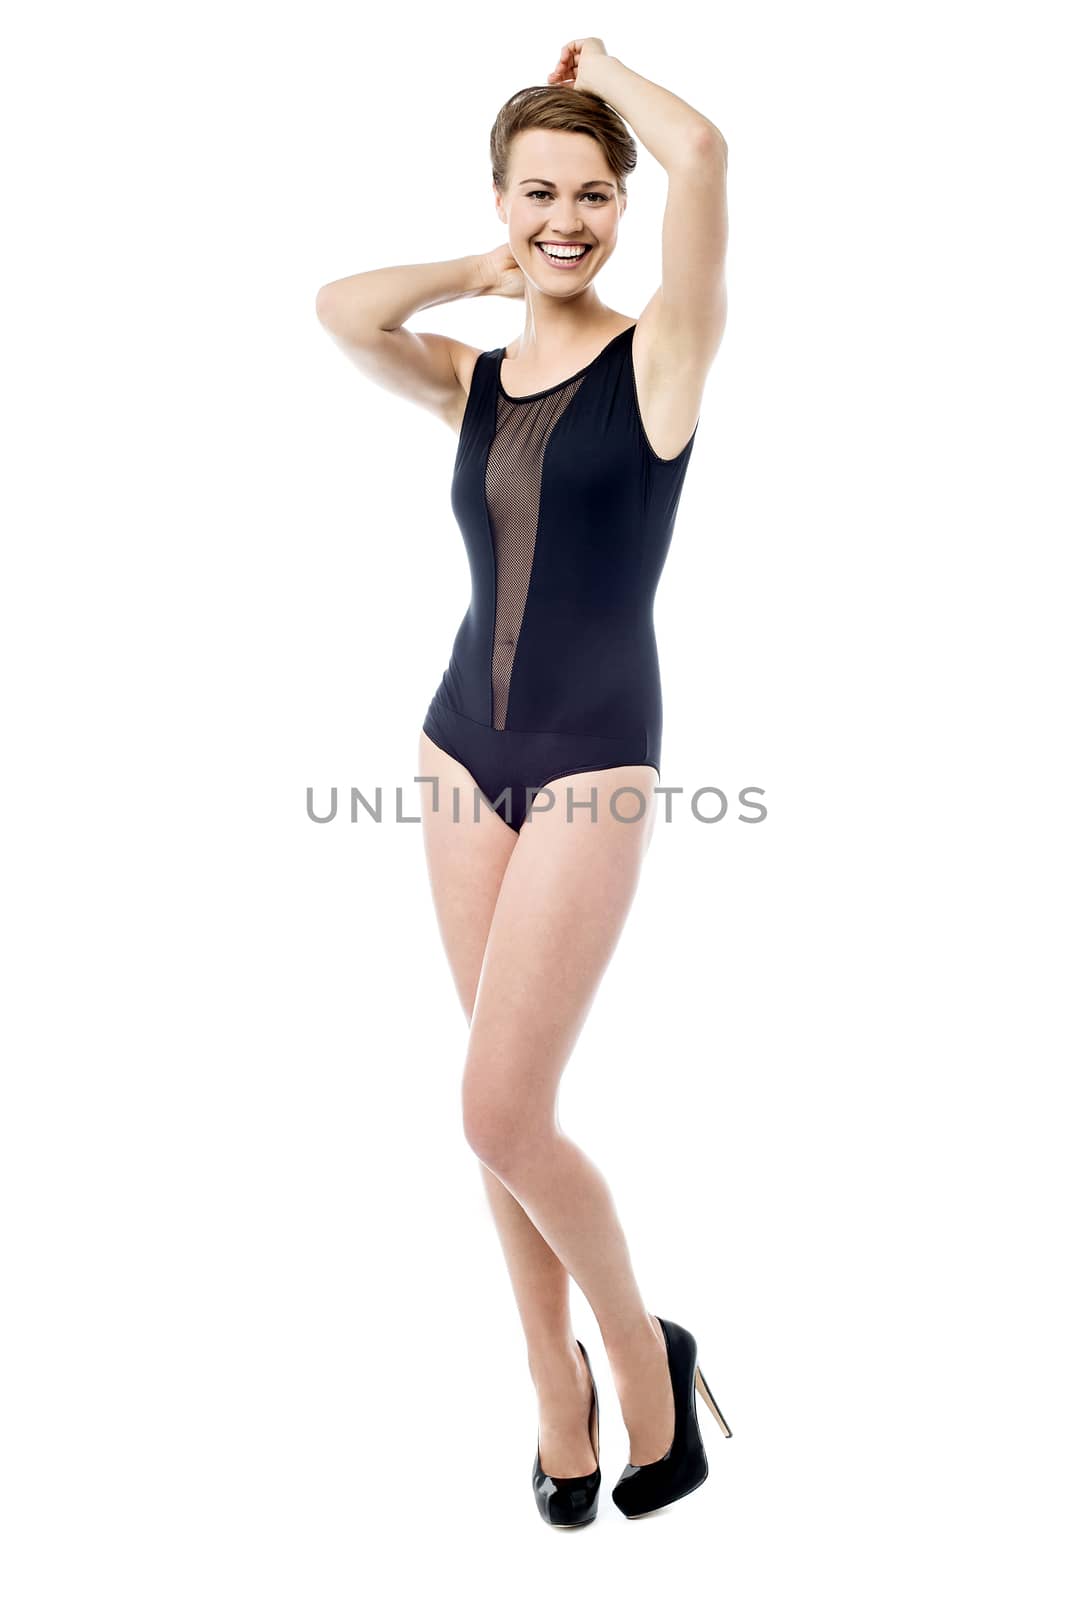 Attractive woman posing in sensual swimsuit